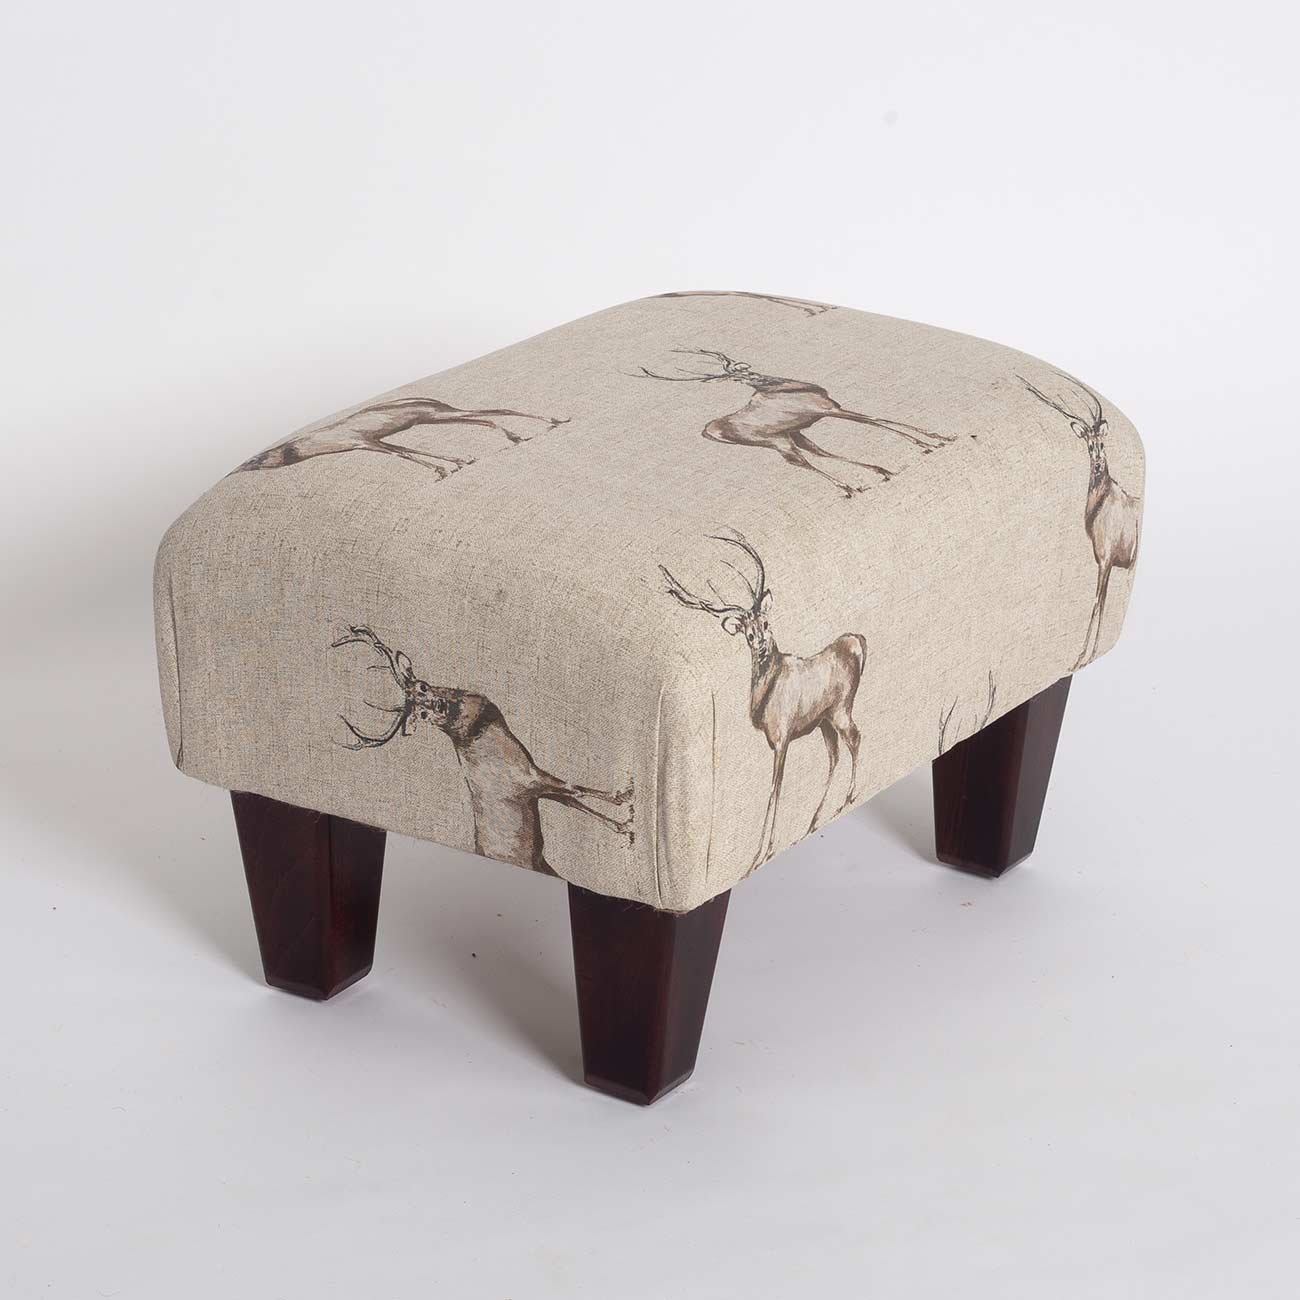 stag-print-footstool3 fabric from JLP